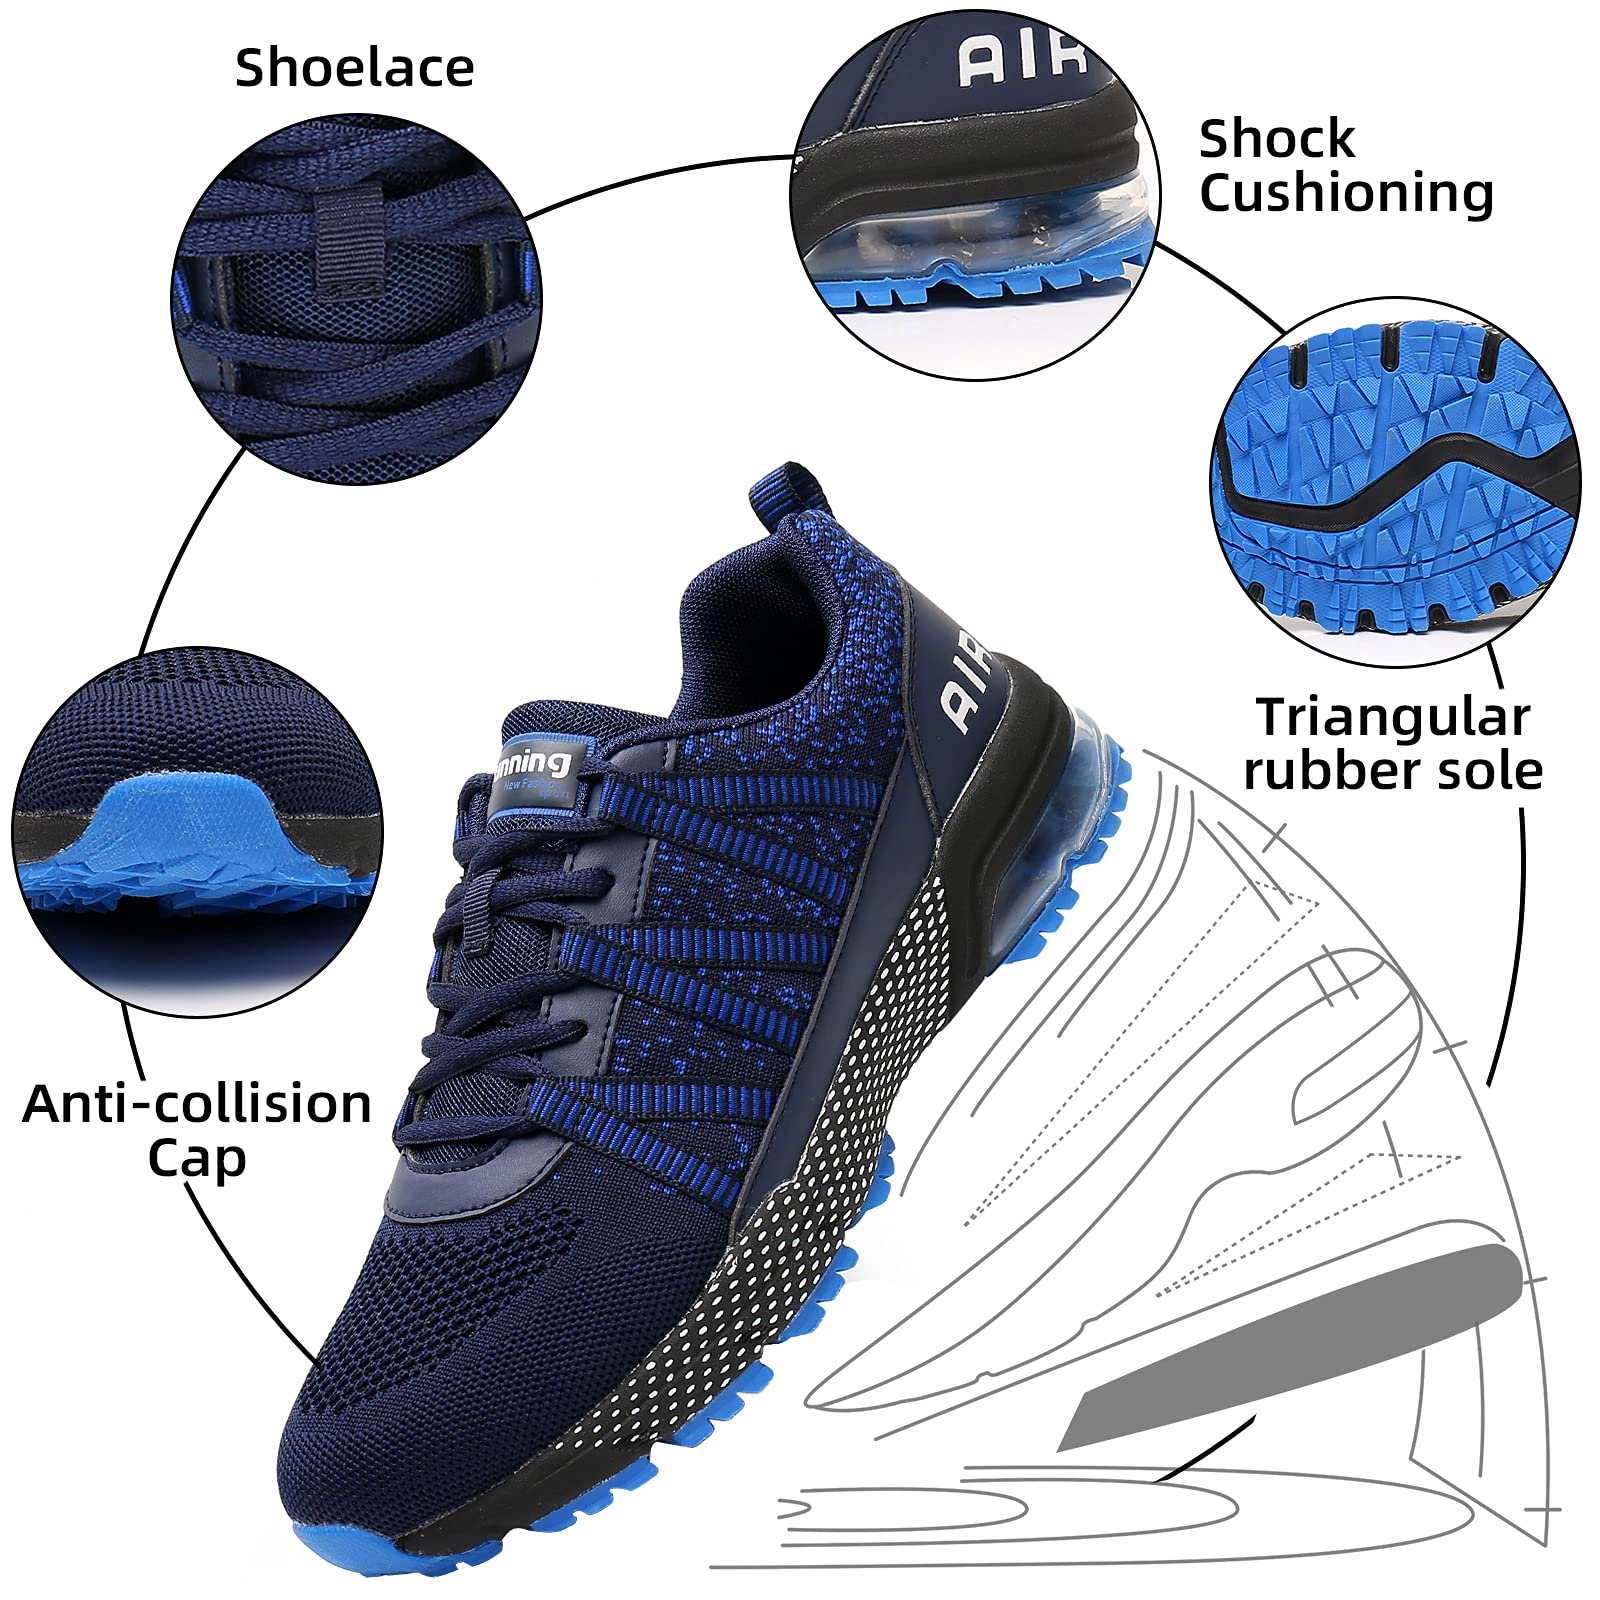 ADCORAN Women Running Shoes Air Cushion Shock Absorption Non Slip Sneakers Mesh Breathable Tennis Walking Shoes for Fitness Jogging Shopping Blue 6.5